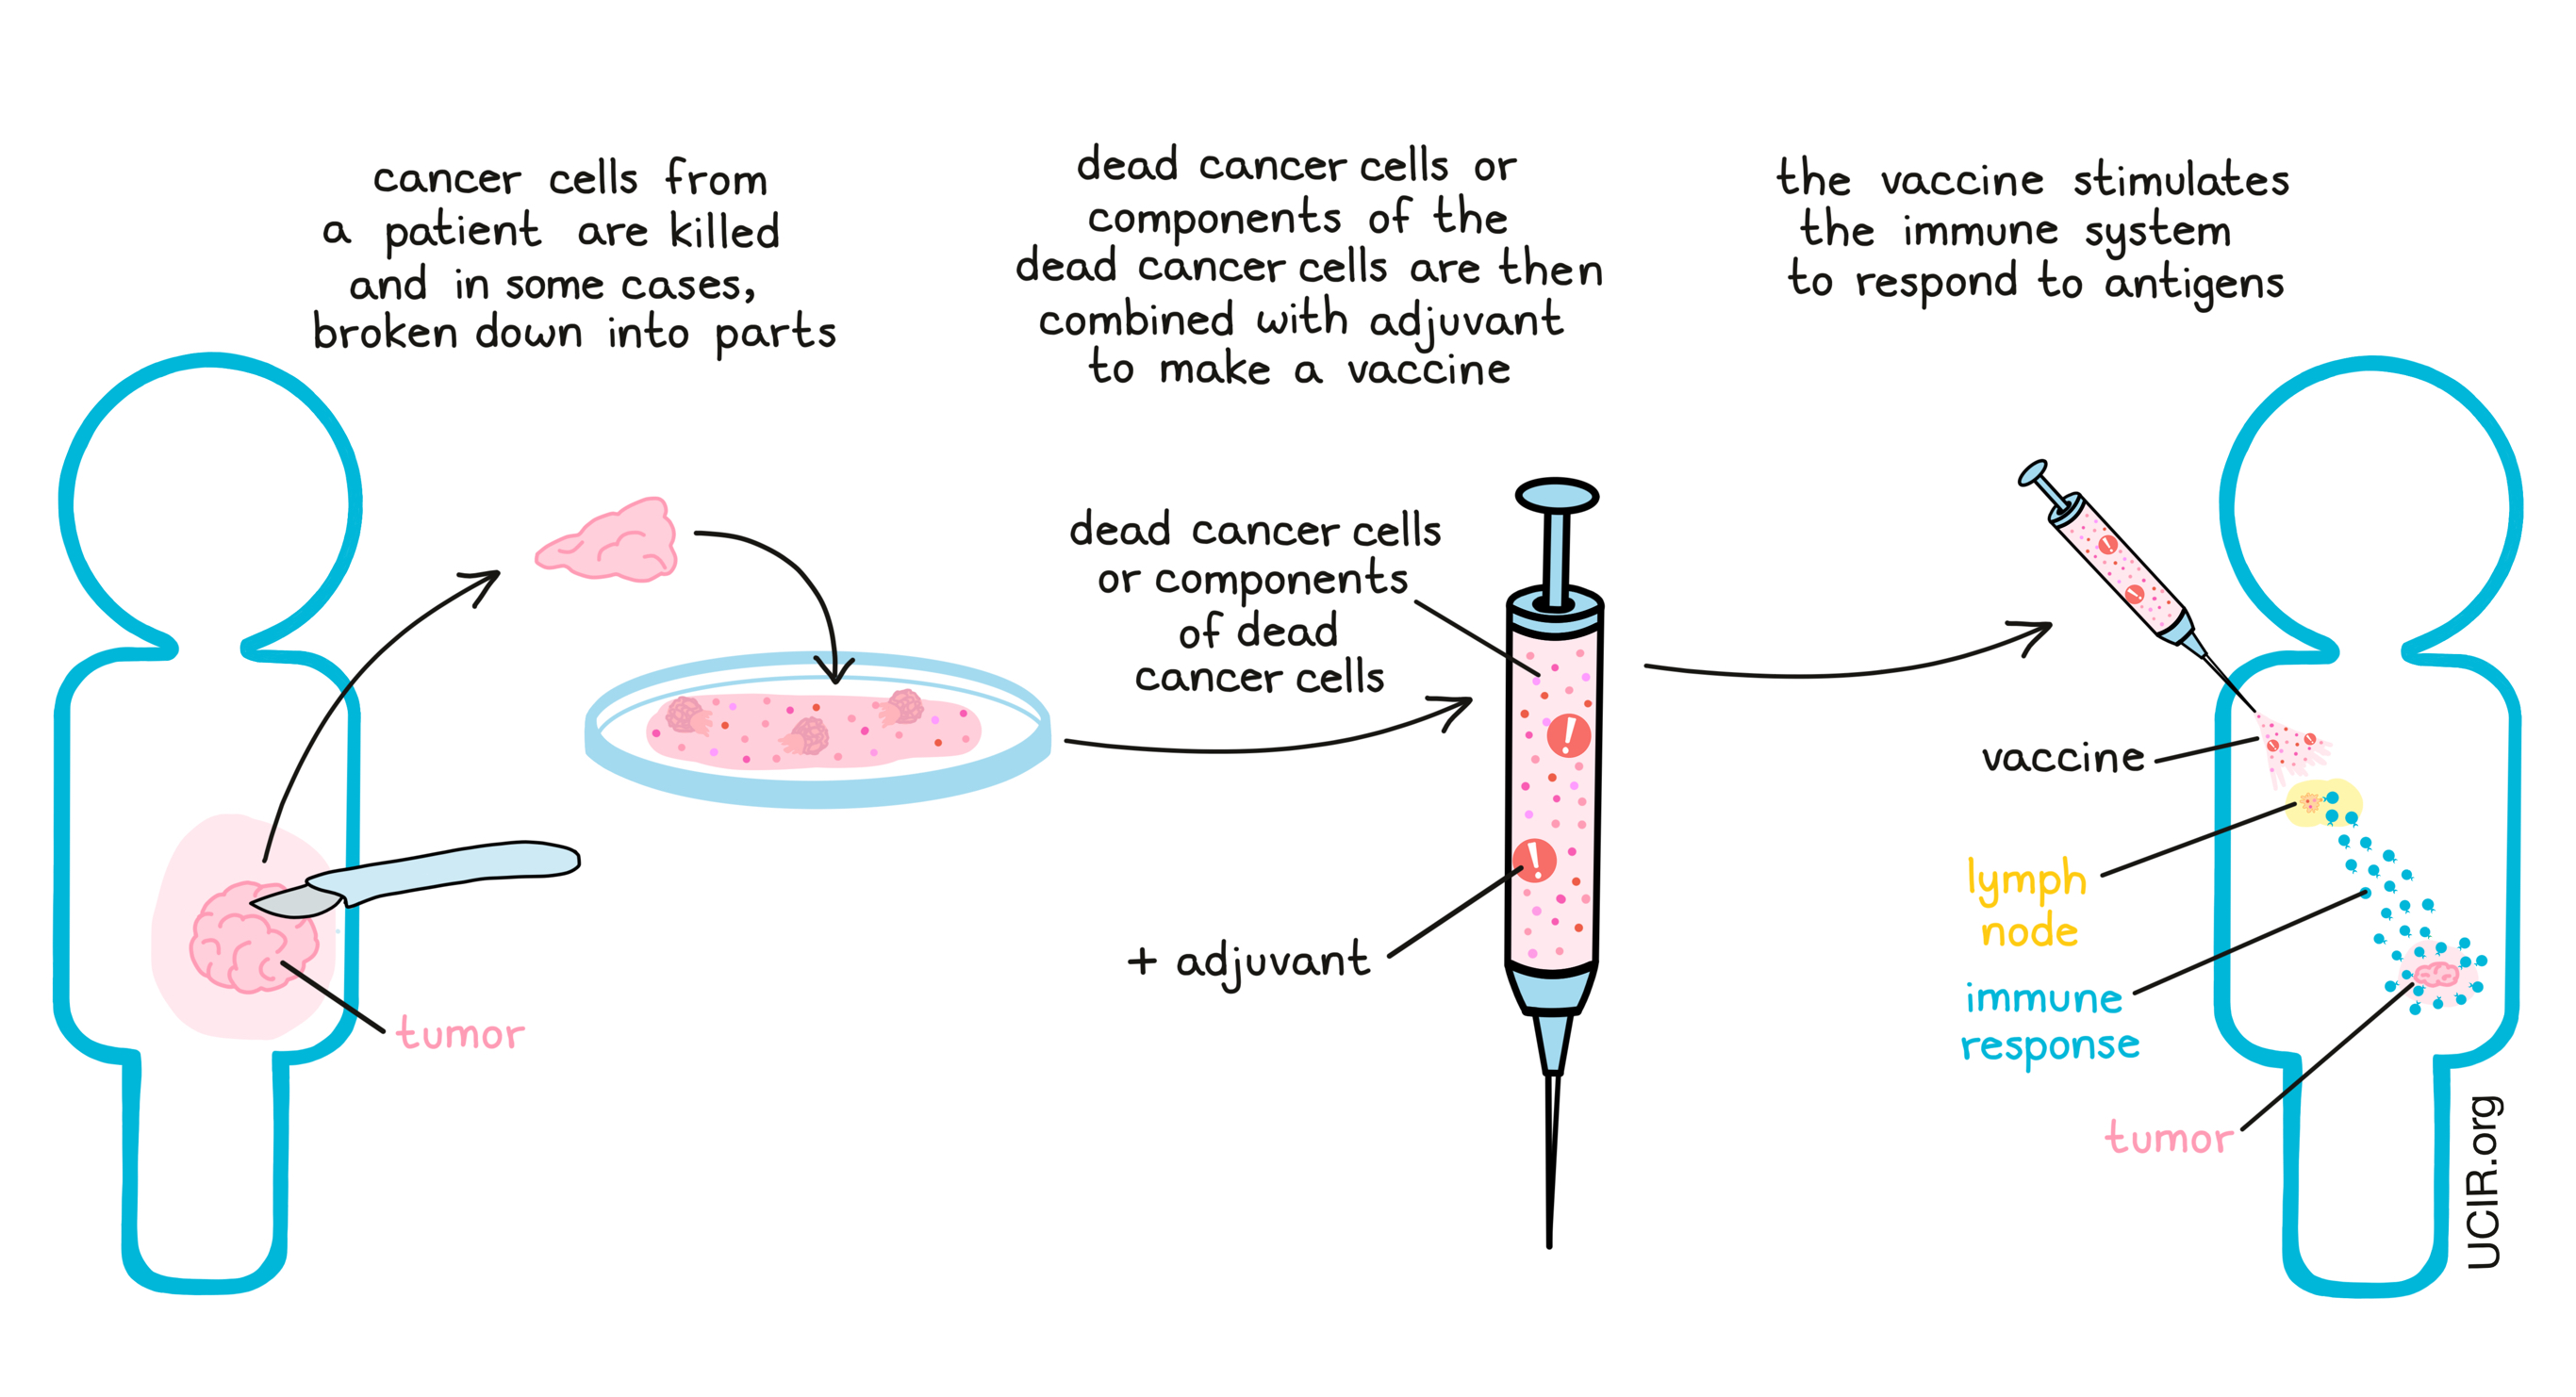 If a tumor can be removed by surgery, it is possible to make a vaccine that includes all of the antigens in the tumor by using samples of the tumor itself